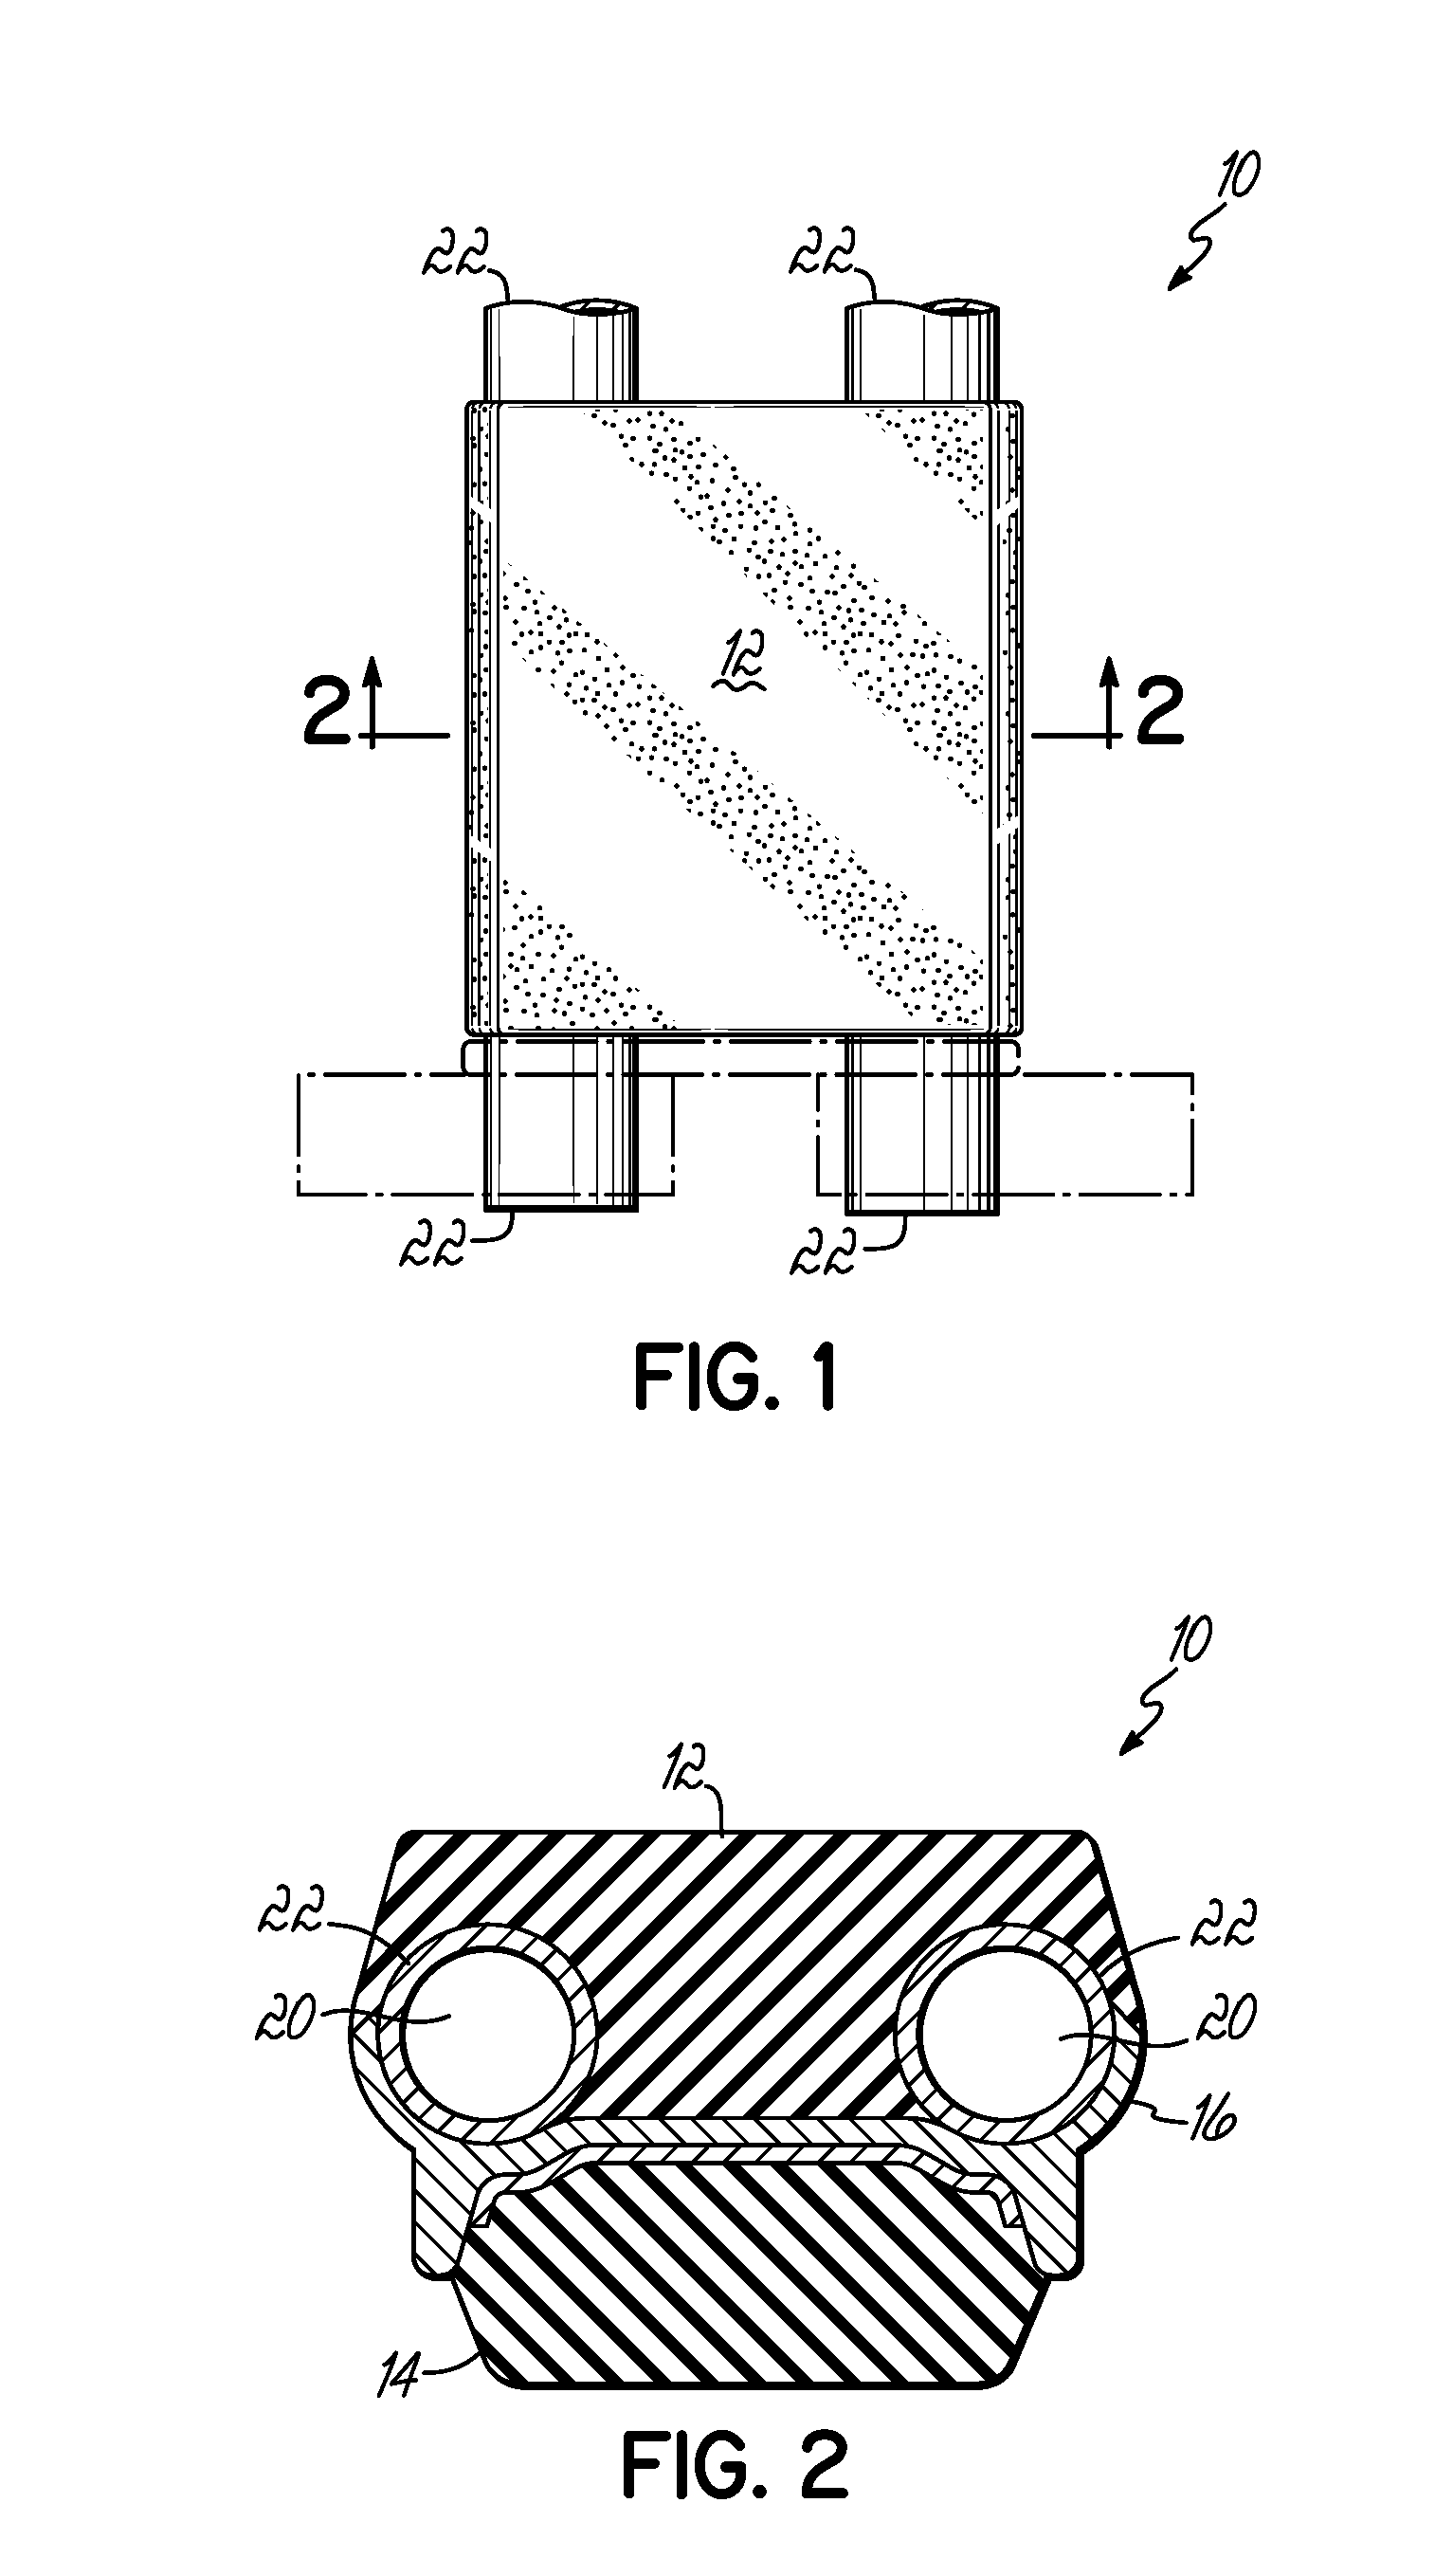 Track segment with ep(d)m rubber based backer and method of making